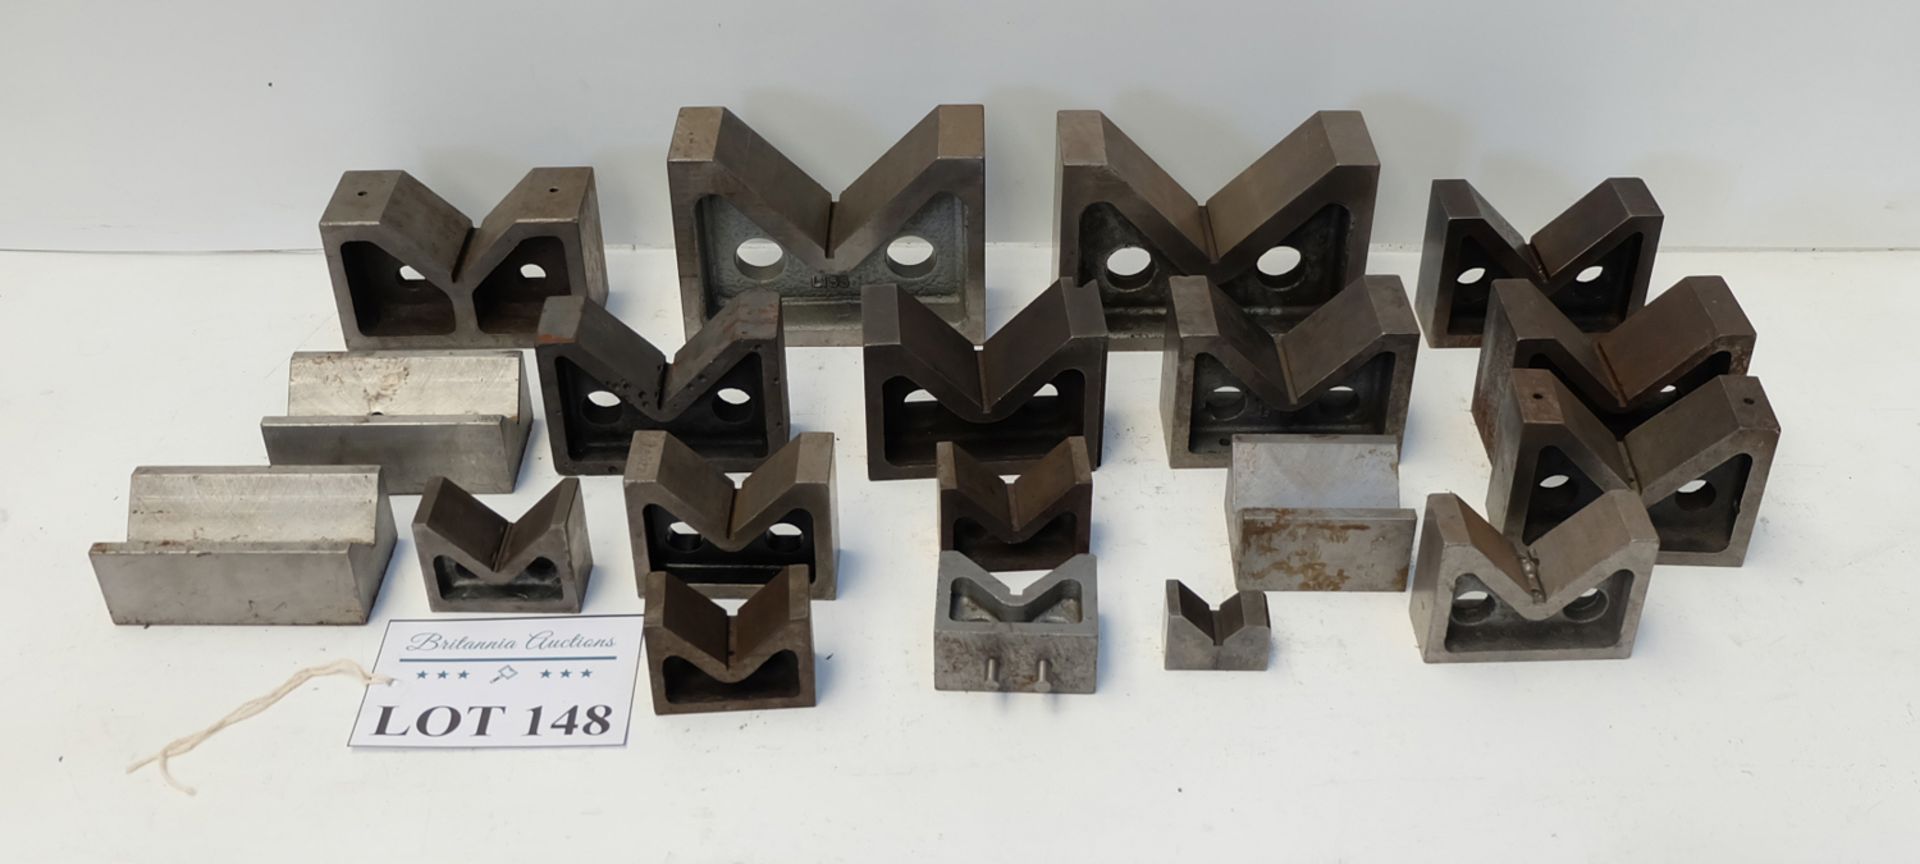 Large Selection of Vee Blocks as Lotted.